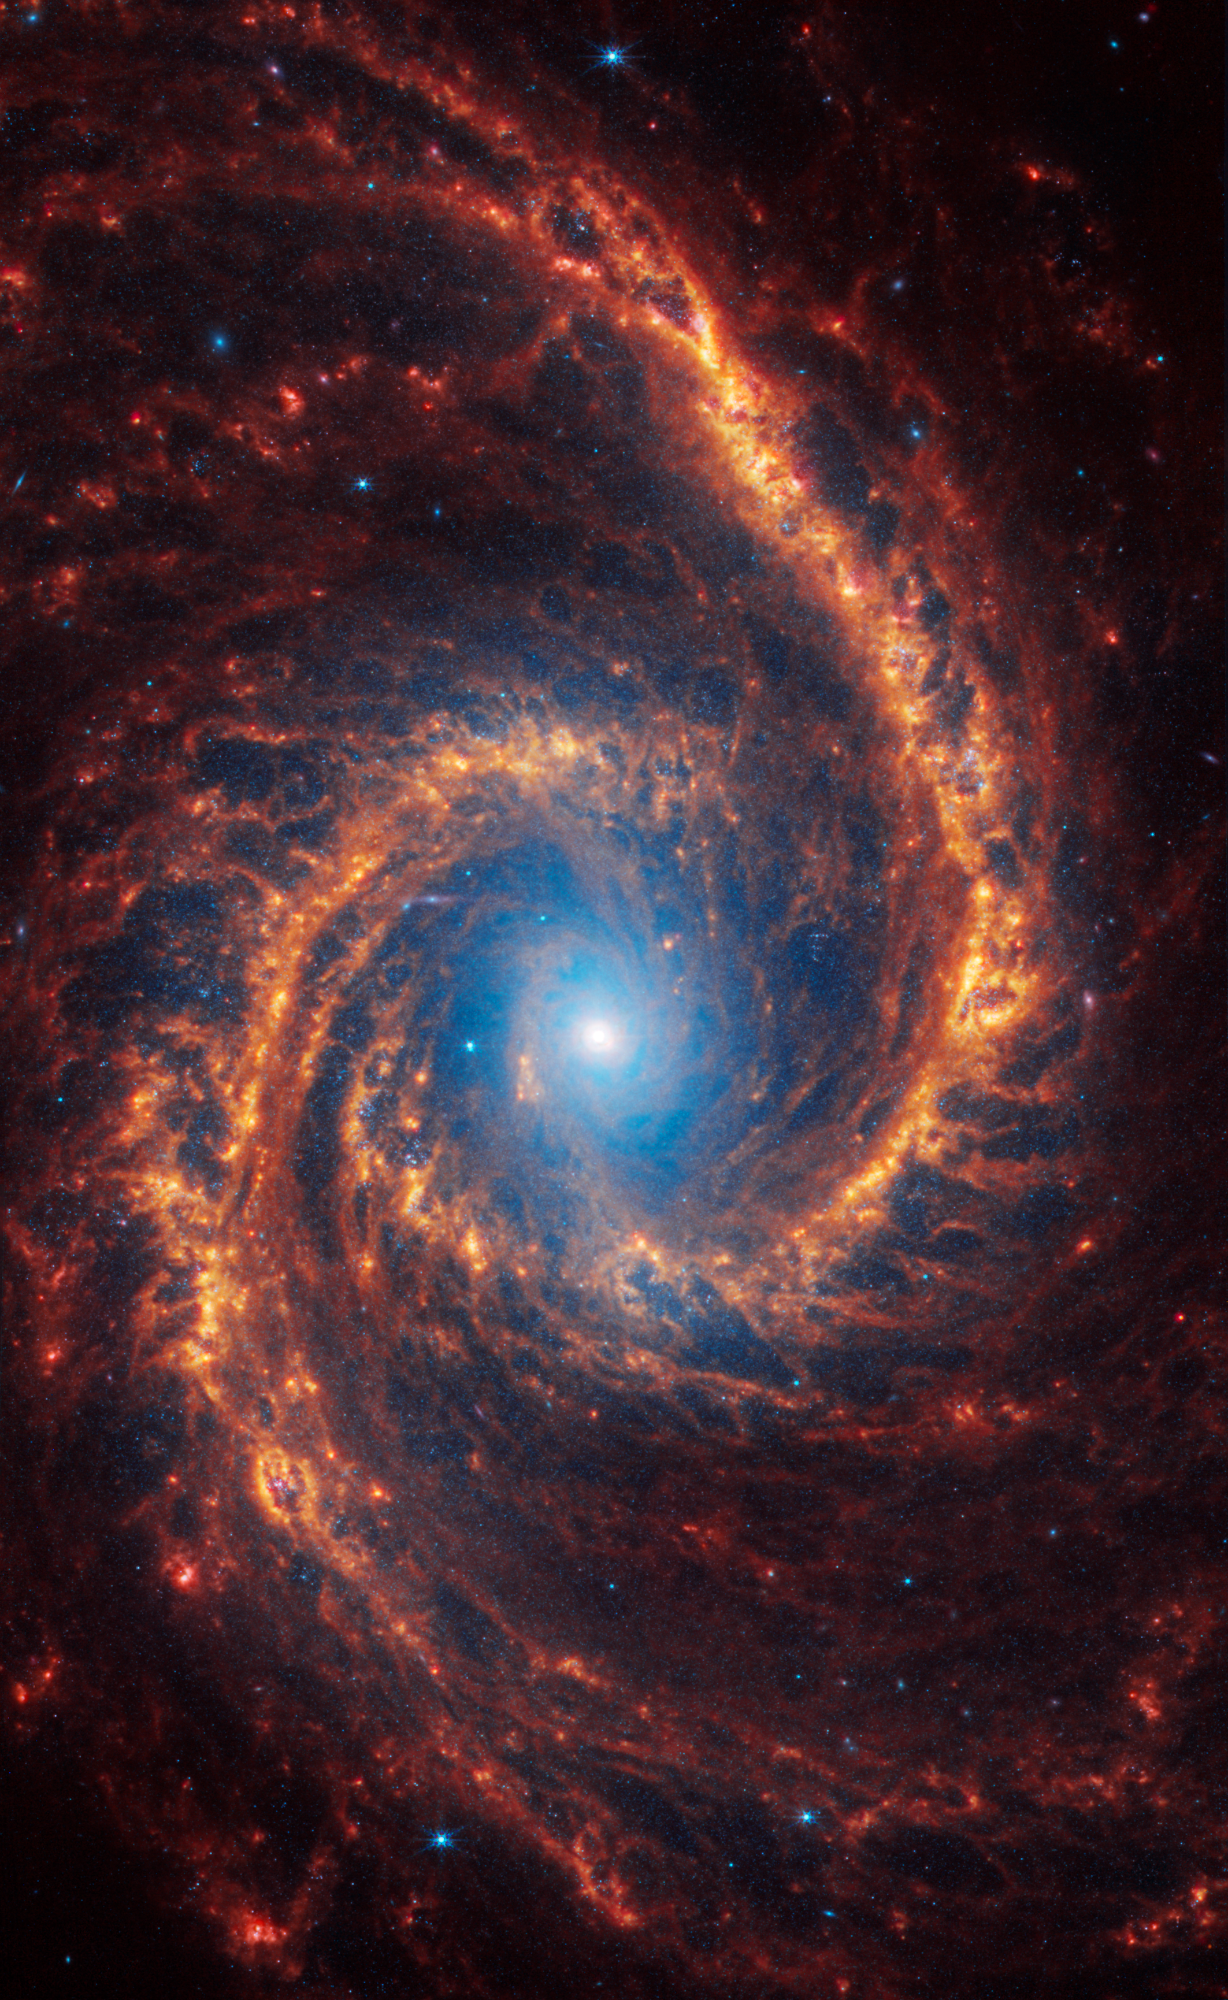 Webb’s image of the galaxy NGC 1566 shows a densely populated face-on spiral galaxy anchored by its slightly oval central region, consisting of a core and small bar structure, which has a light blue haze of stars that covers about a quarter of the view. Two prominent spiny spiral arms made of stars, gas, and dust also start at the center, within the blue haze, and extend to the edges, rotating counterclockwise. The spiral arms of the galaxy are largely orange, ranging from dark to bright orange. The brightest areas of the arms are two large arcs that start at the central region and stretch up to the top and bottom. Scattered across the packed scene are innumerable bright blue pinpoints of light, which are stars spread throughout the galaxy. In areas where there is less orange, it is darker, and some dark regions look more circular. There are bright pink patches of light toward the outer regions of the spiral arms.